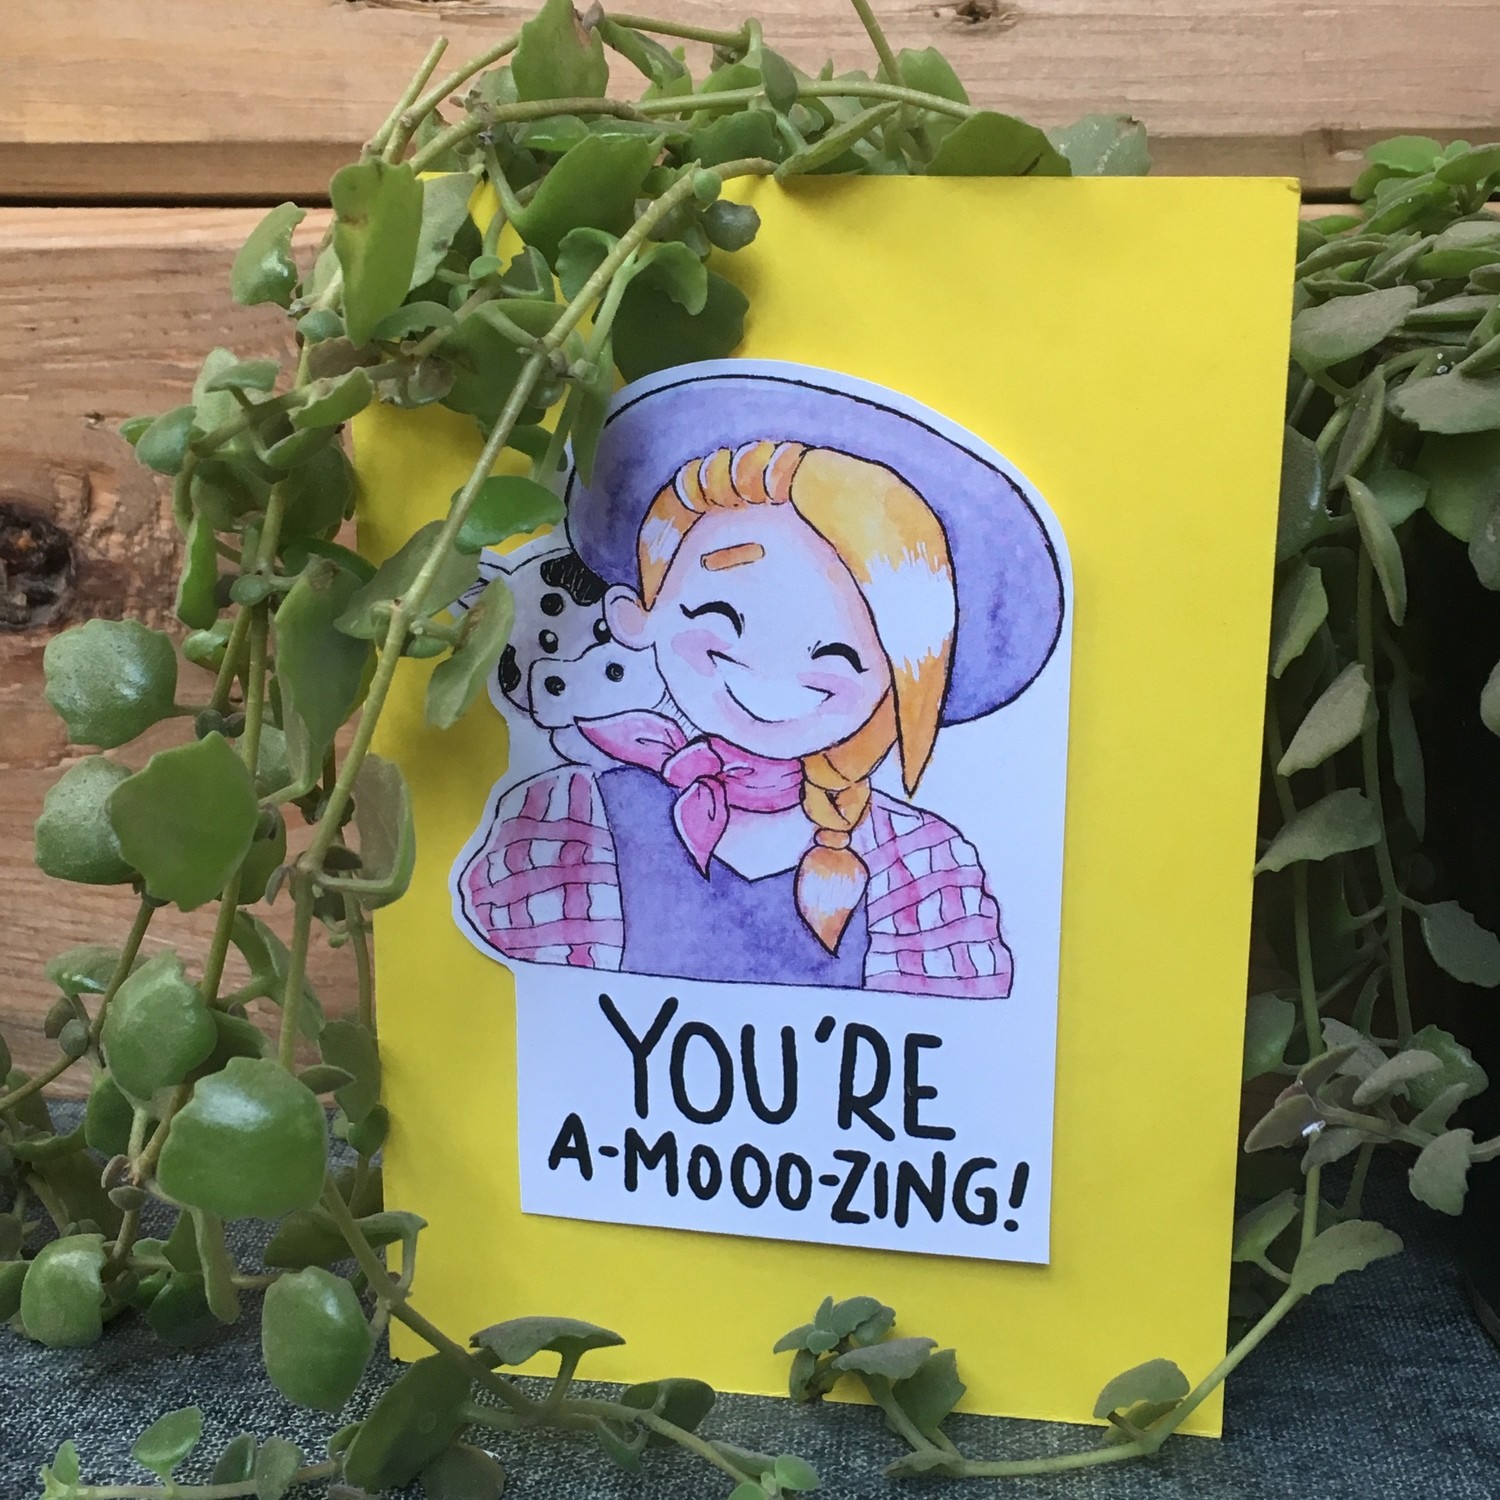 You're A-moo-zing!